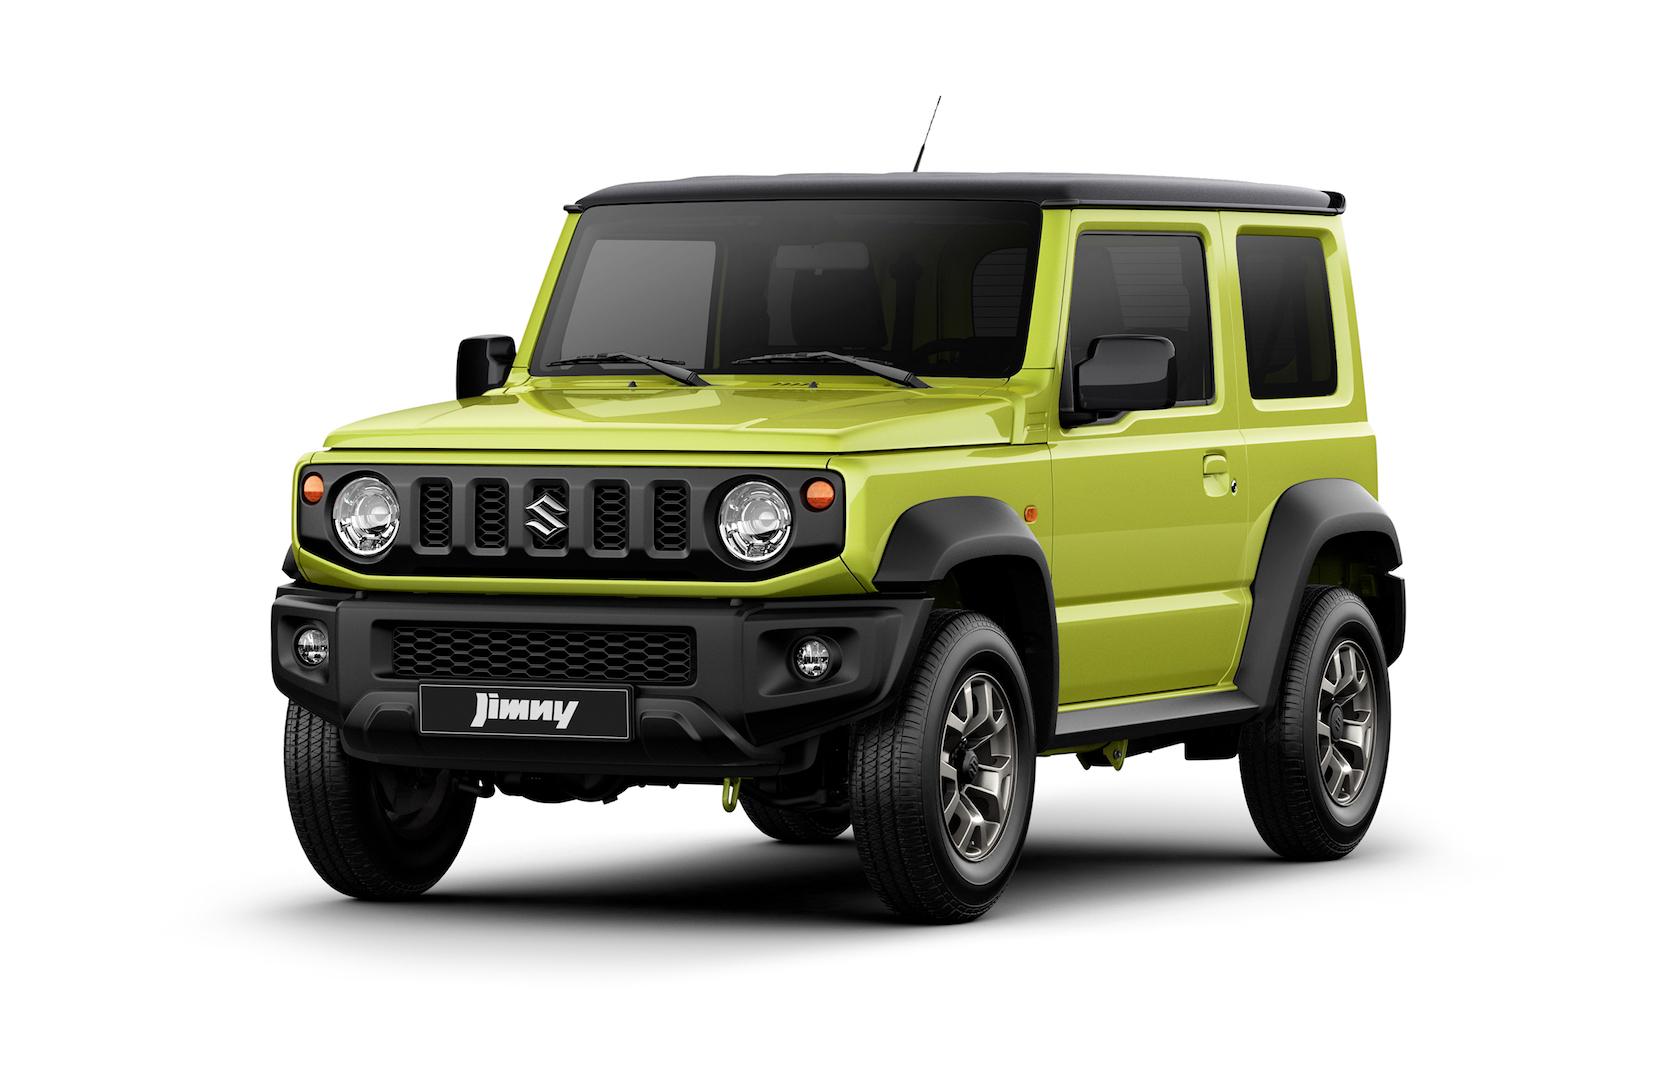 The 2019 Suzuki Jimny is official, and we're officially annoyed - SlashGear